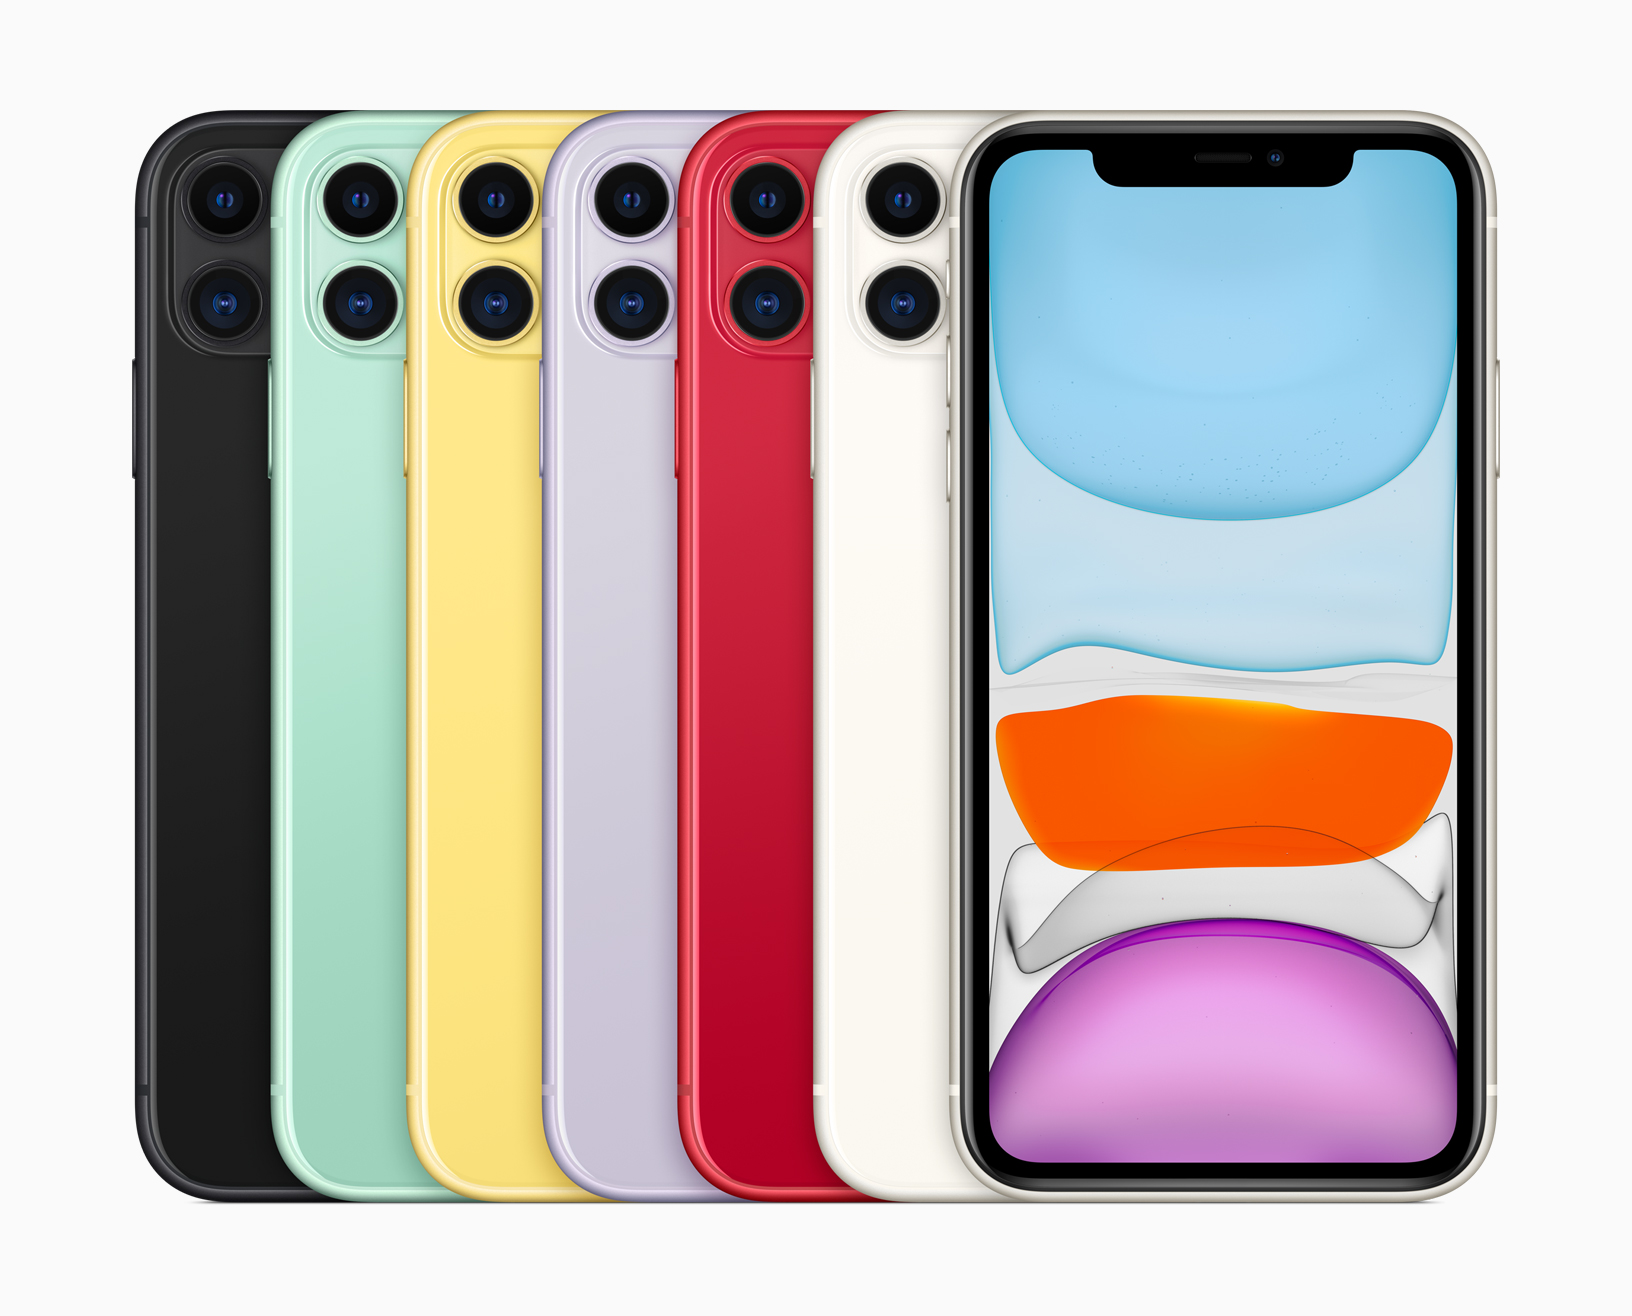 Apple Debuts iPhone 11 - Features A13 Bionic Chip, Dual-Camera Setup, Available in 6 New Colors